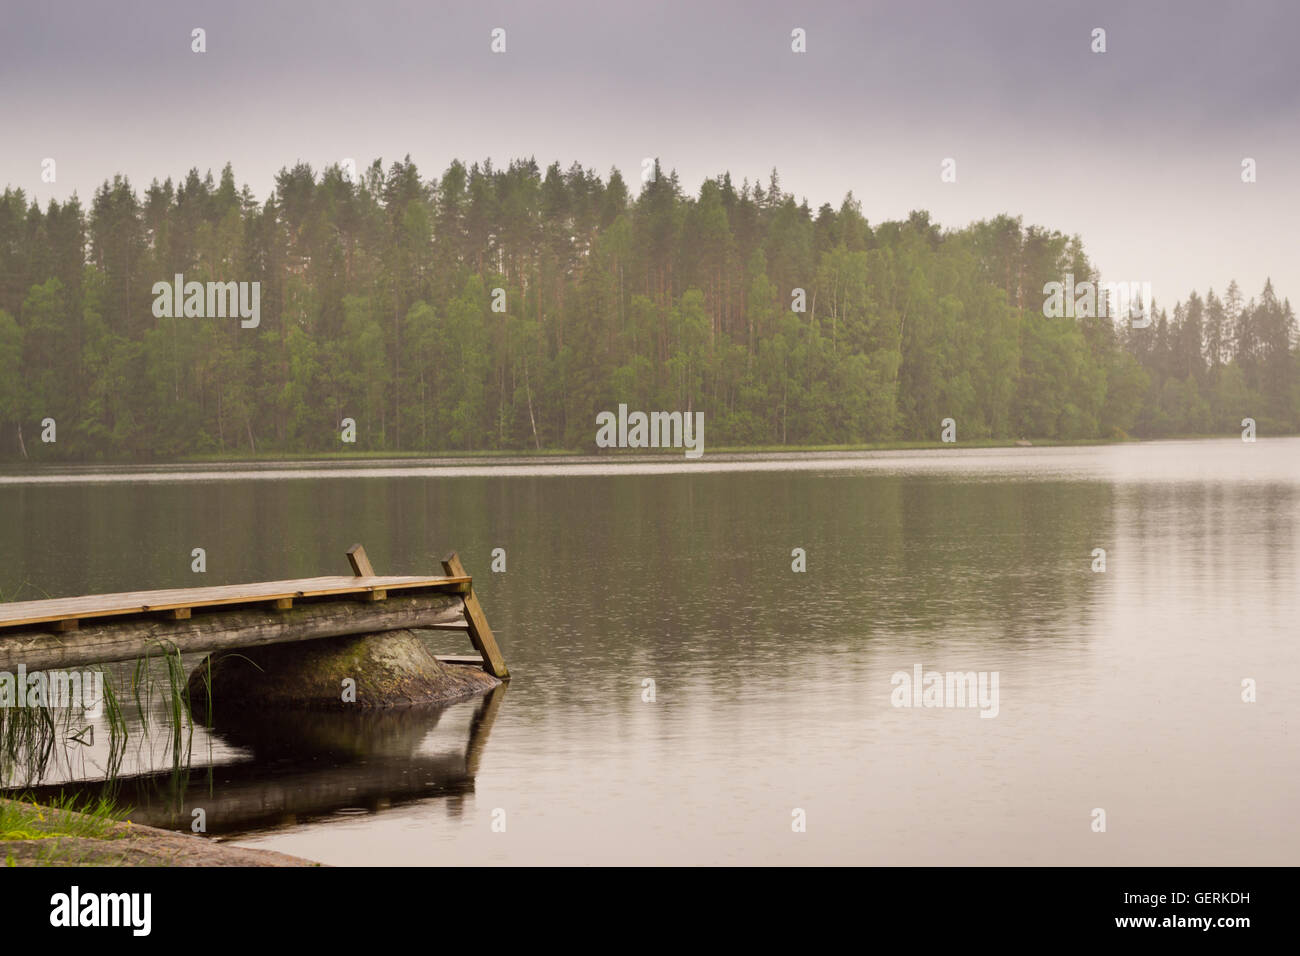 Cloudy summer day on the lake. Wooden boat pier overlooking the water and island. Area for summer camping in the woods. Finland Stock Photo